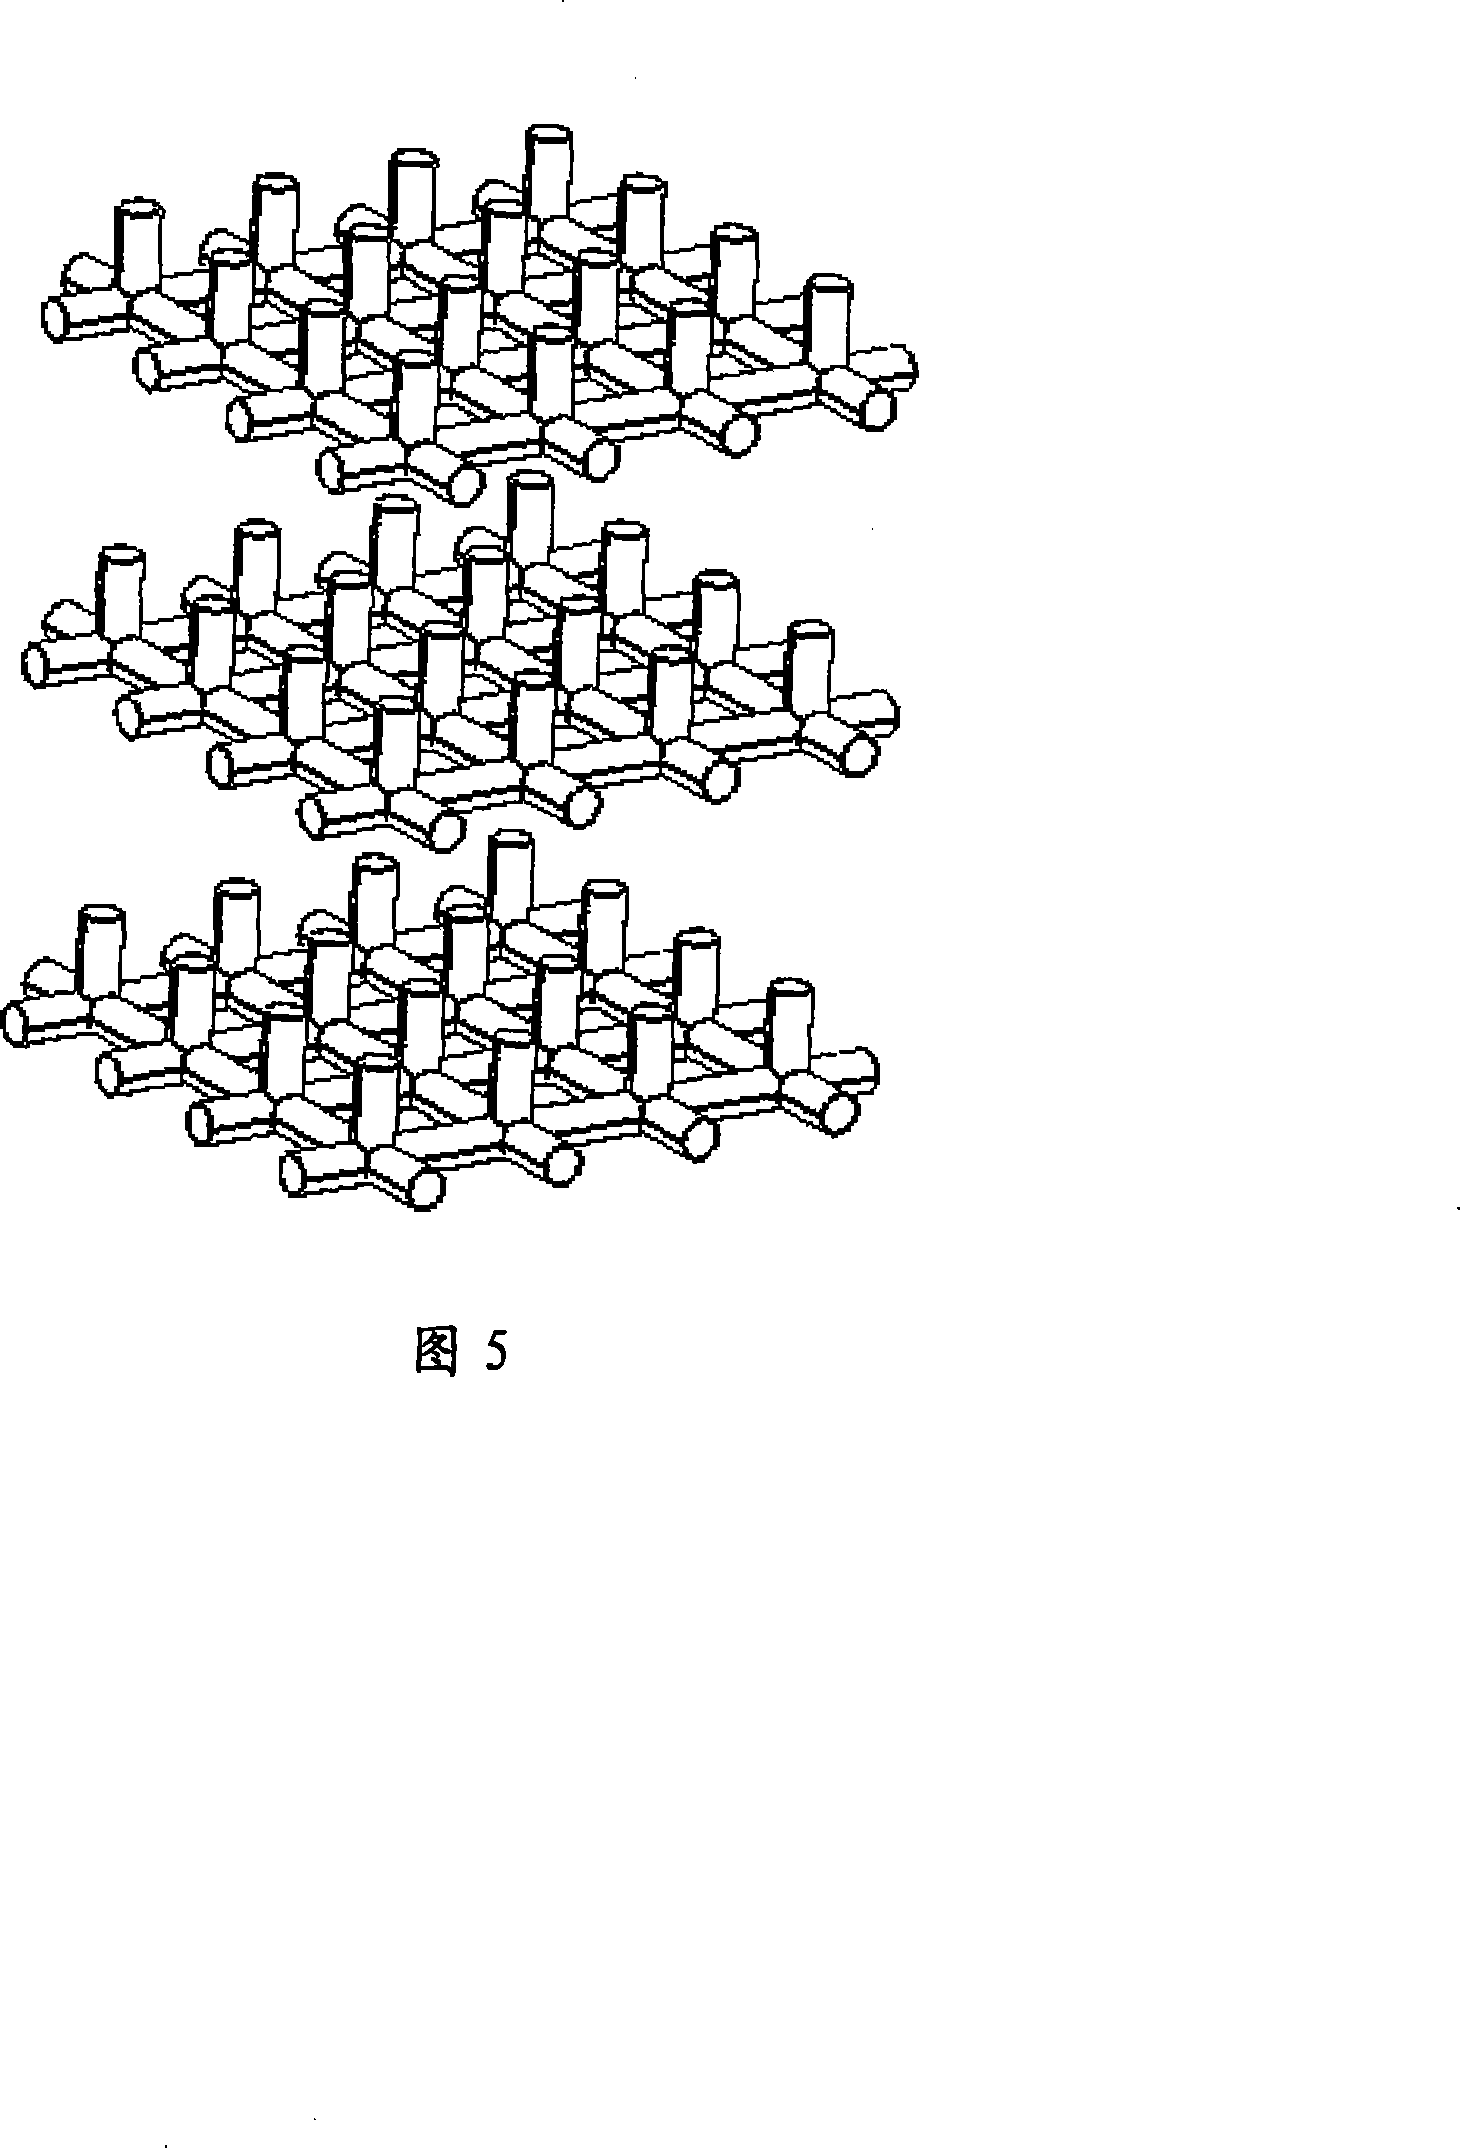 Three dimensional cell culture construct and apparatus for its making